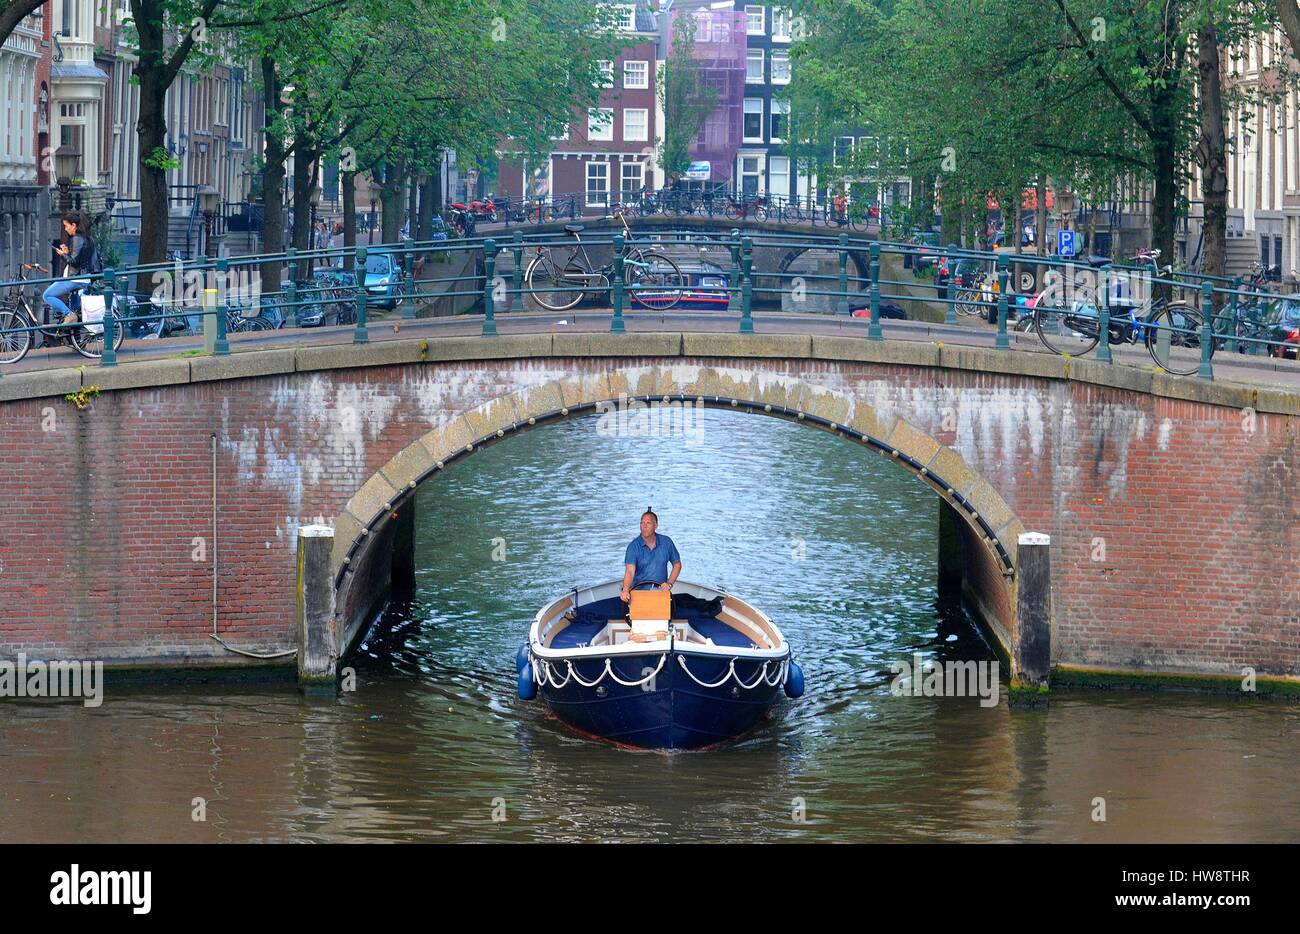 Netherlands, Holland, Amsterdam, ride in the canals Stock Photo